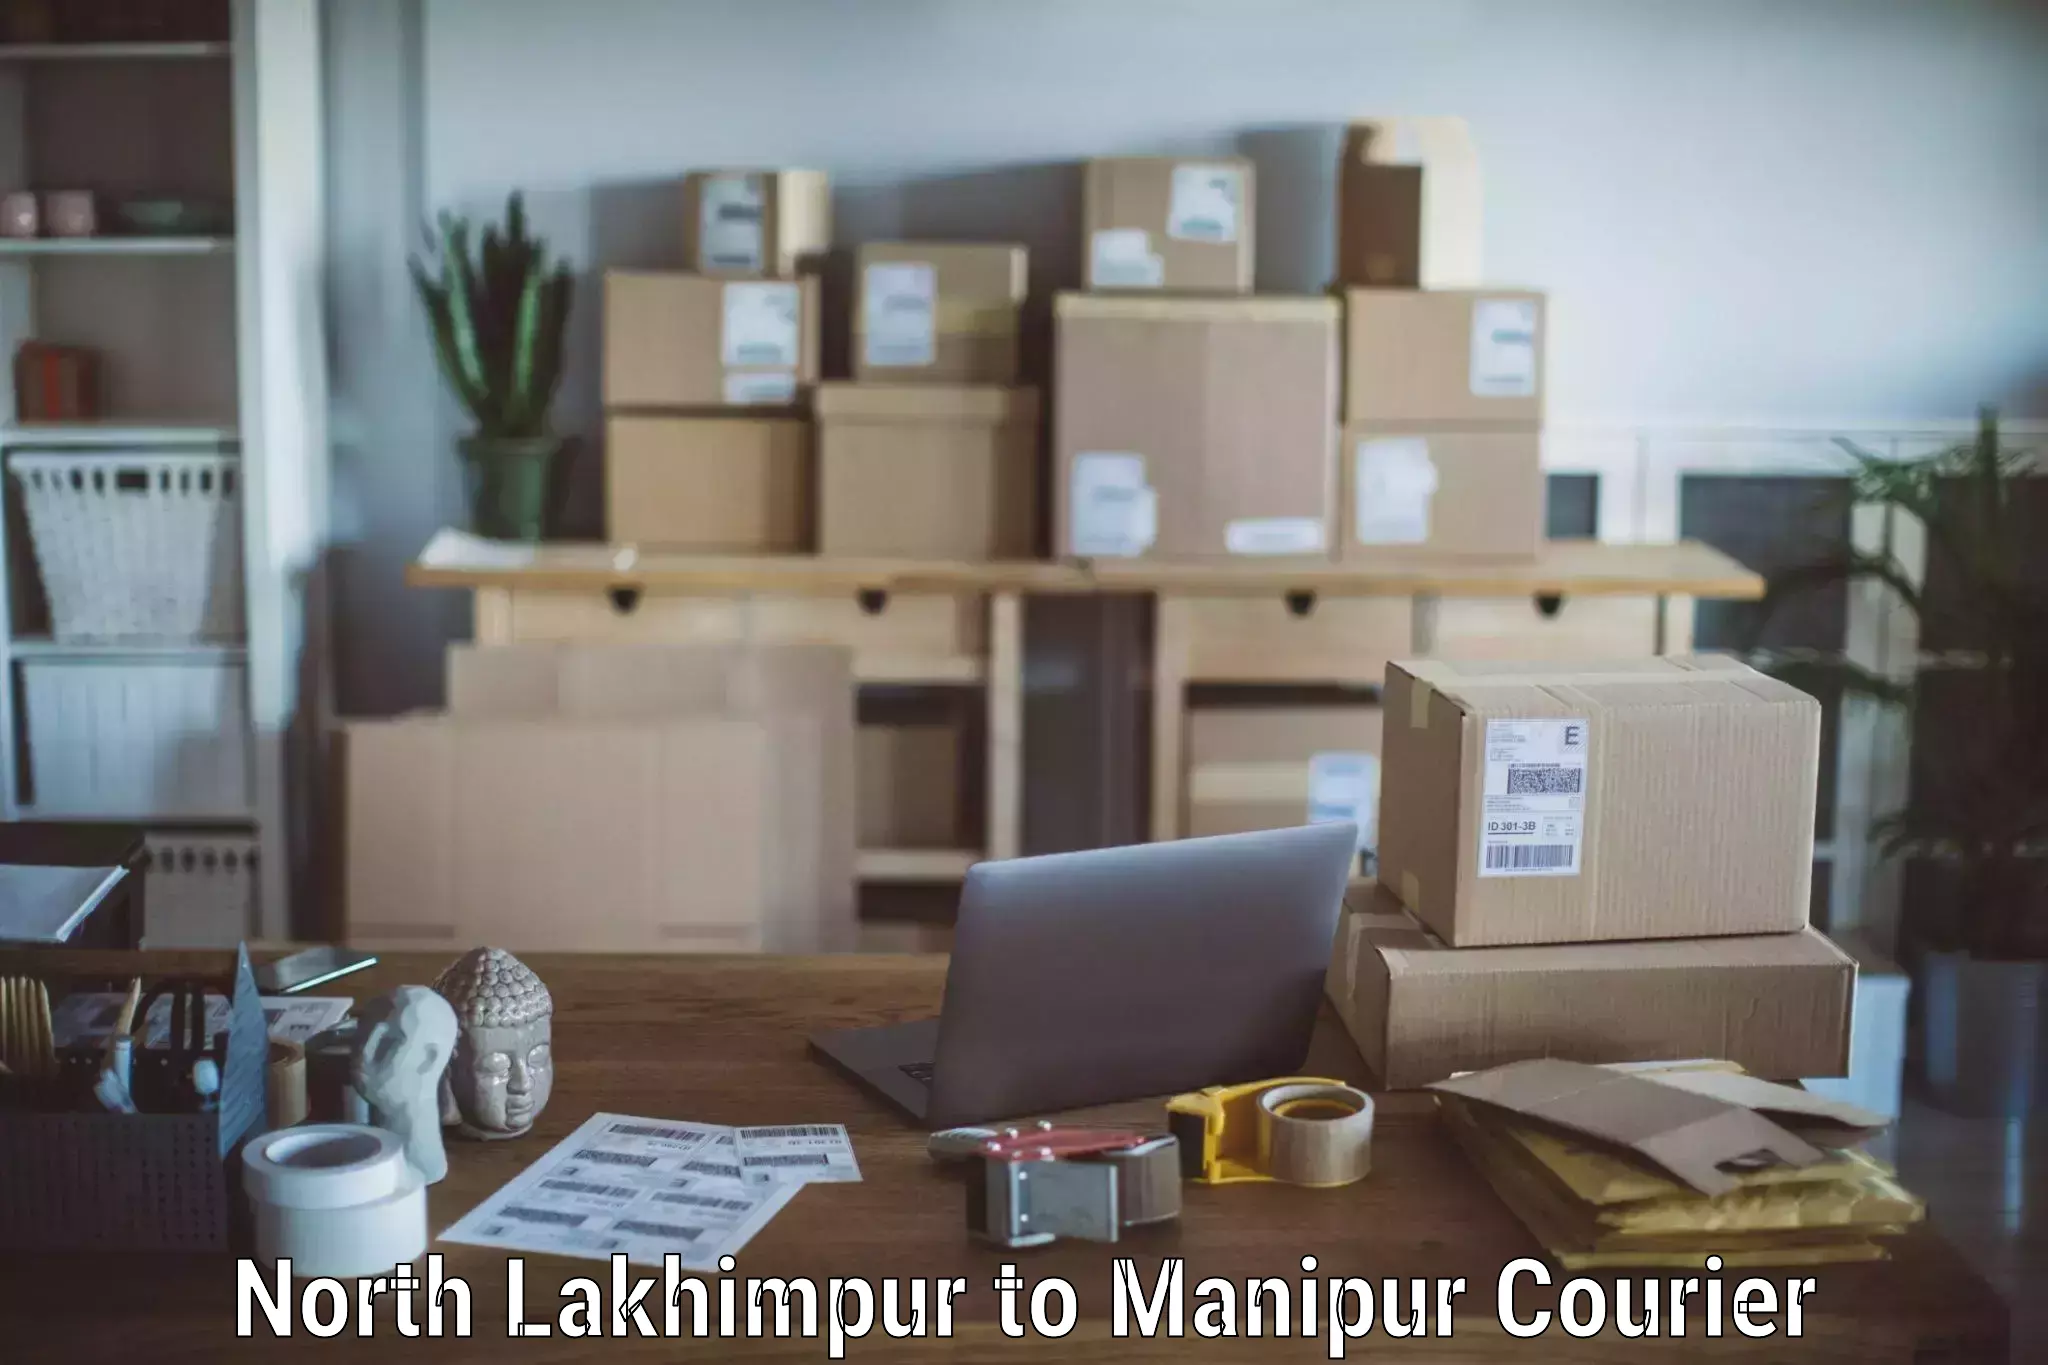 Professional moving assistance North Lakhimpur to Imphal